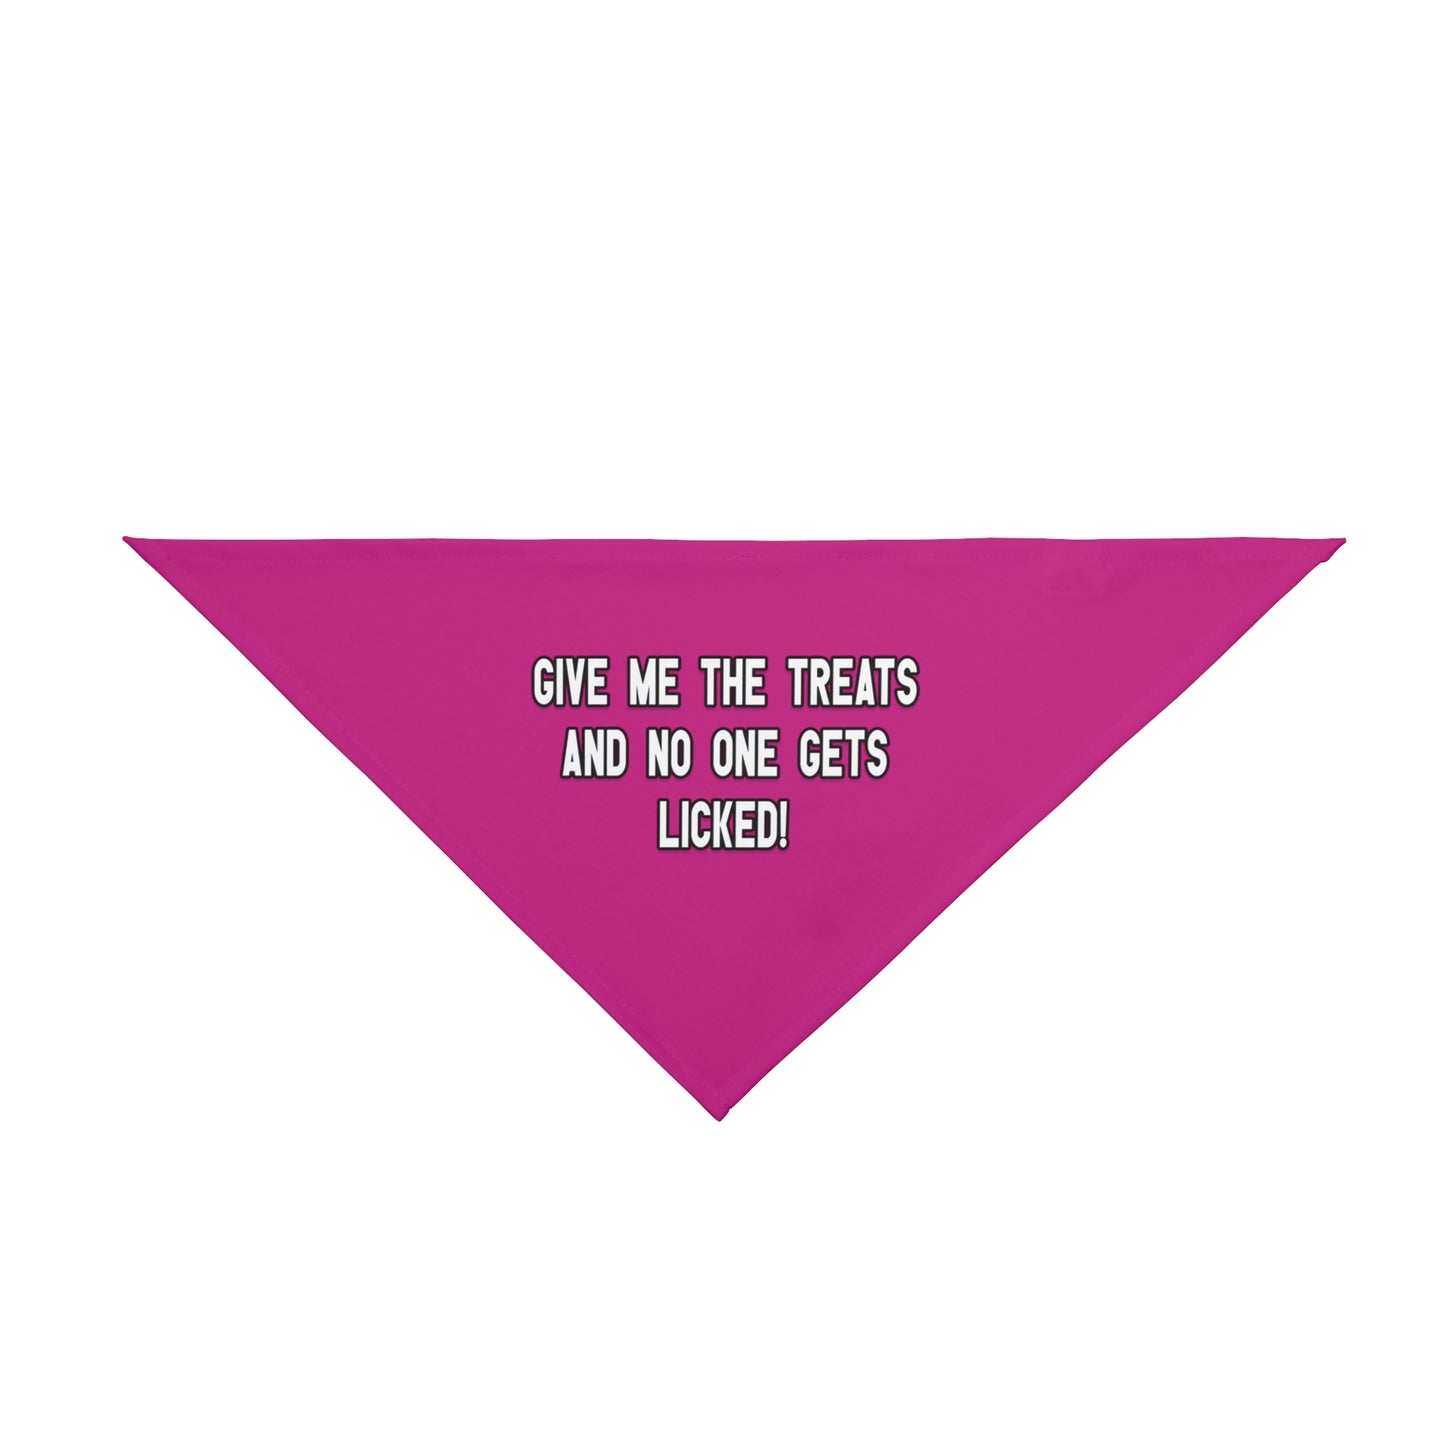 A bandana with the message: Give me the treats and no one gets licked! Bandana's Color is pink